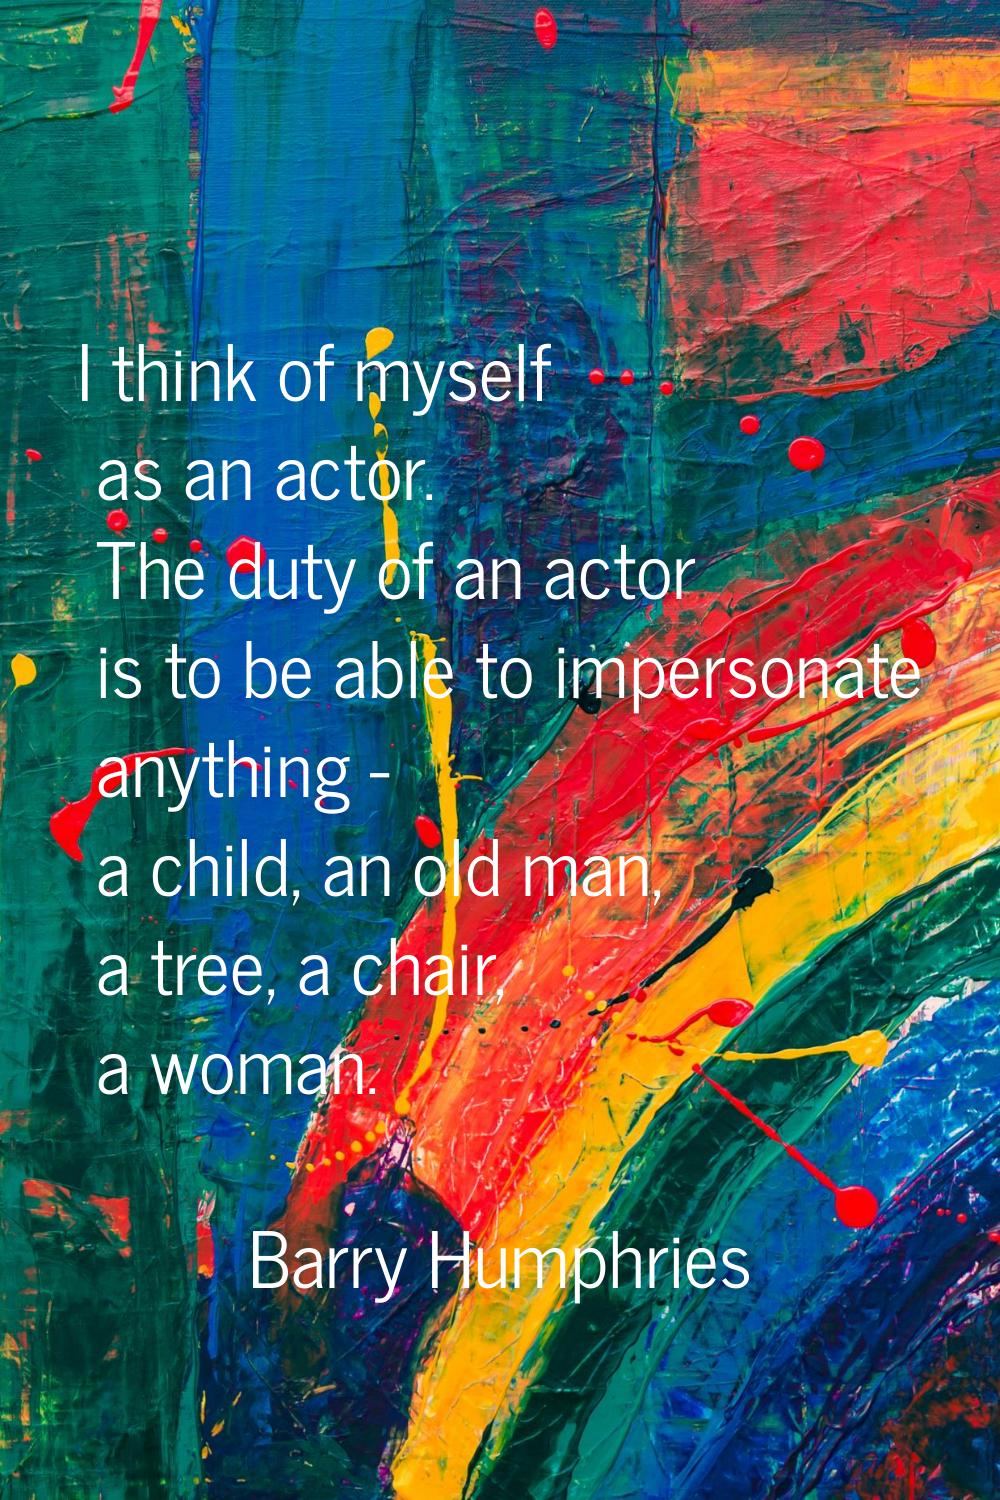 I think of myself as an actor. The duty of an actor is to be able to impersonate anything - a child